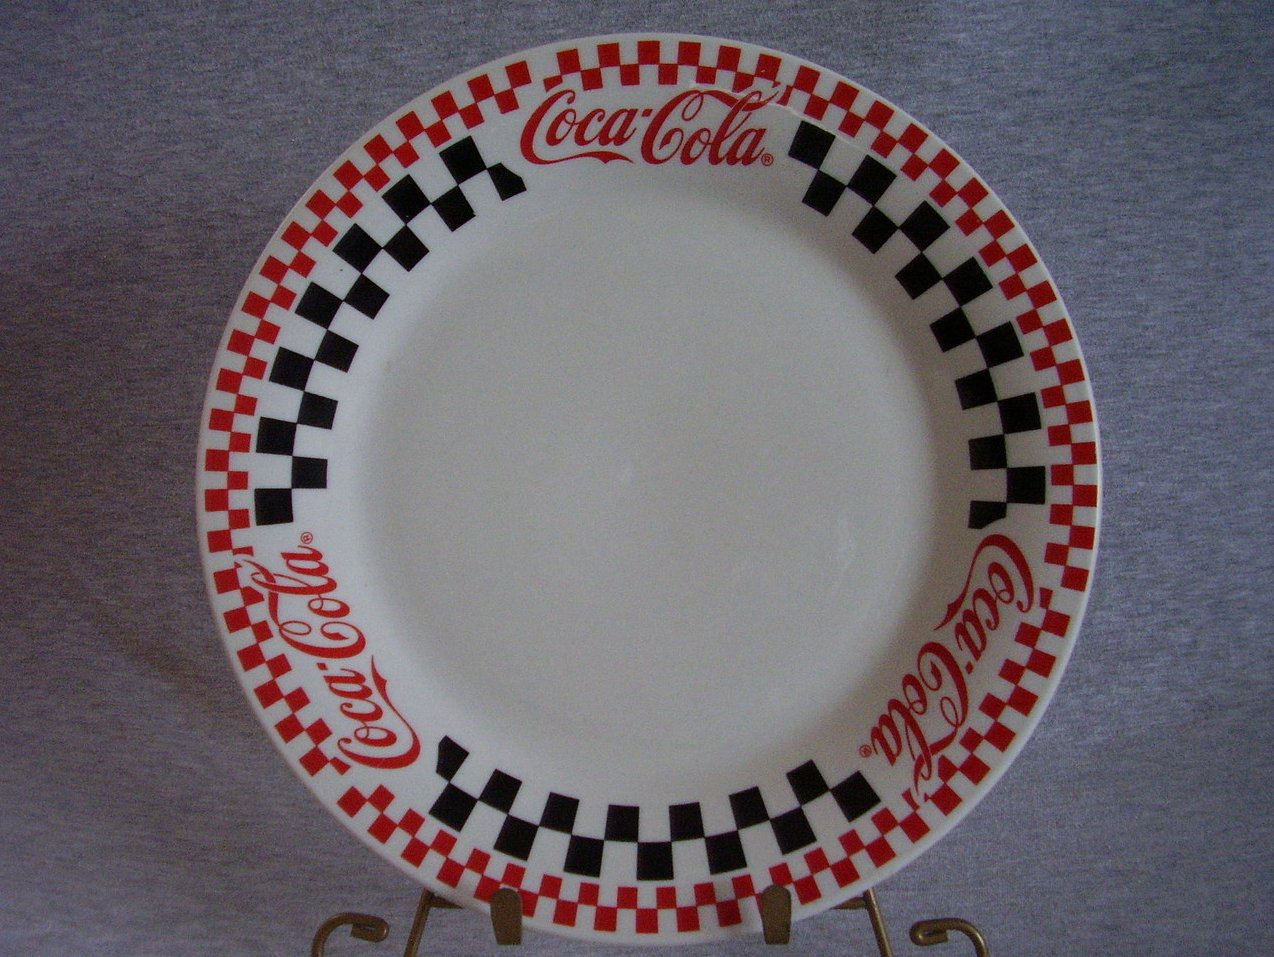 Gibson Dinnerware Coca Cola Dinner Plate Red Black Checkers